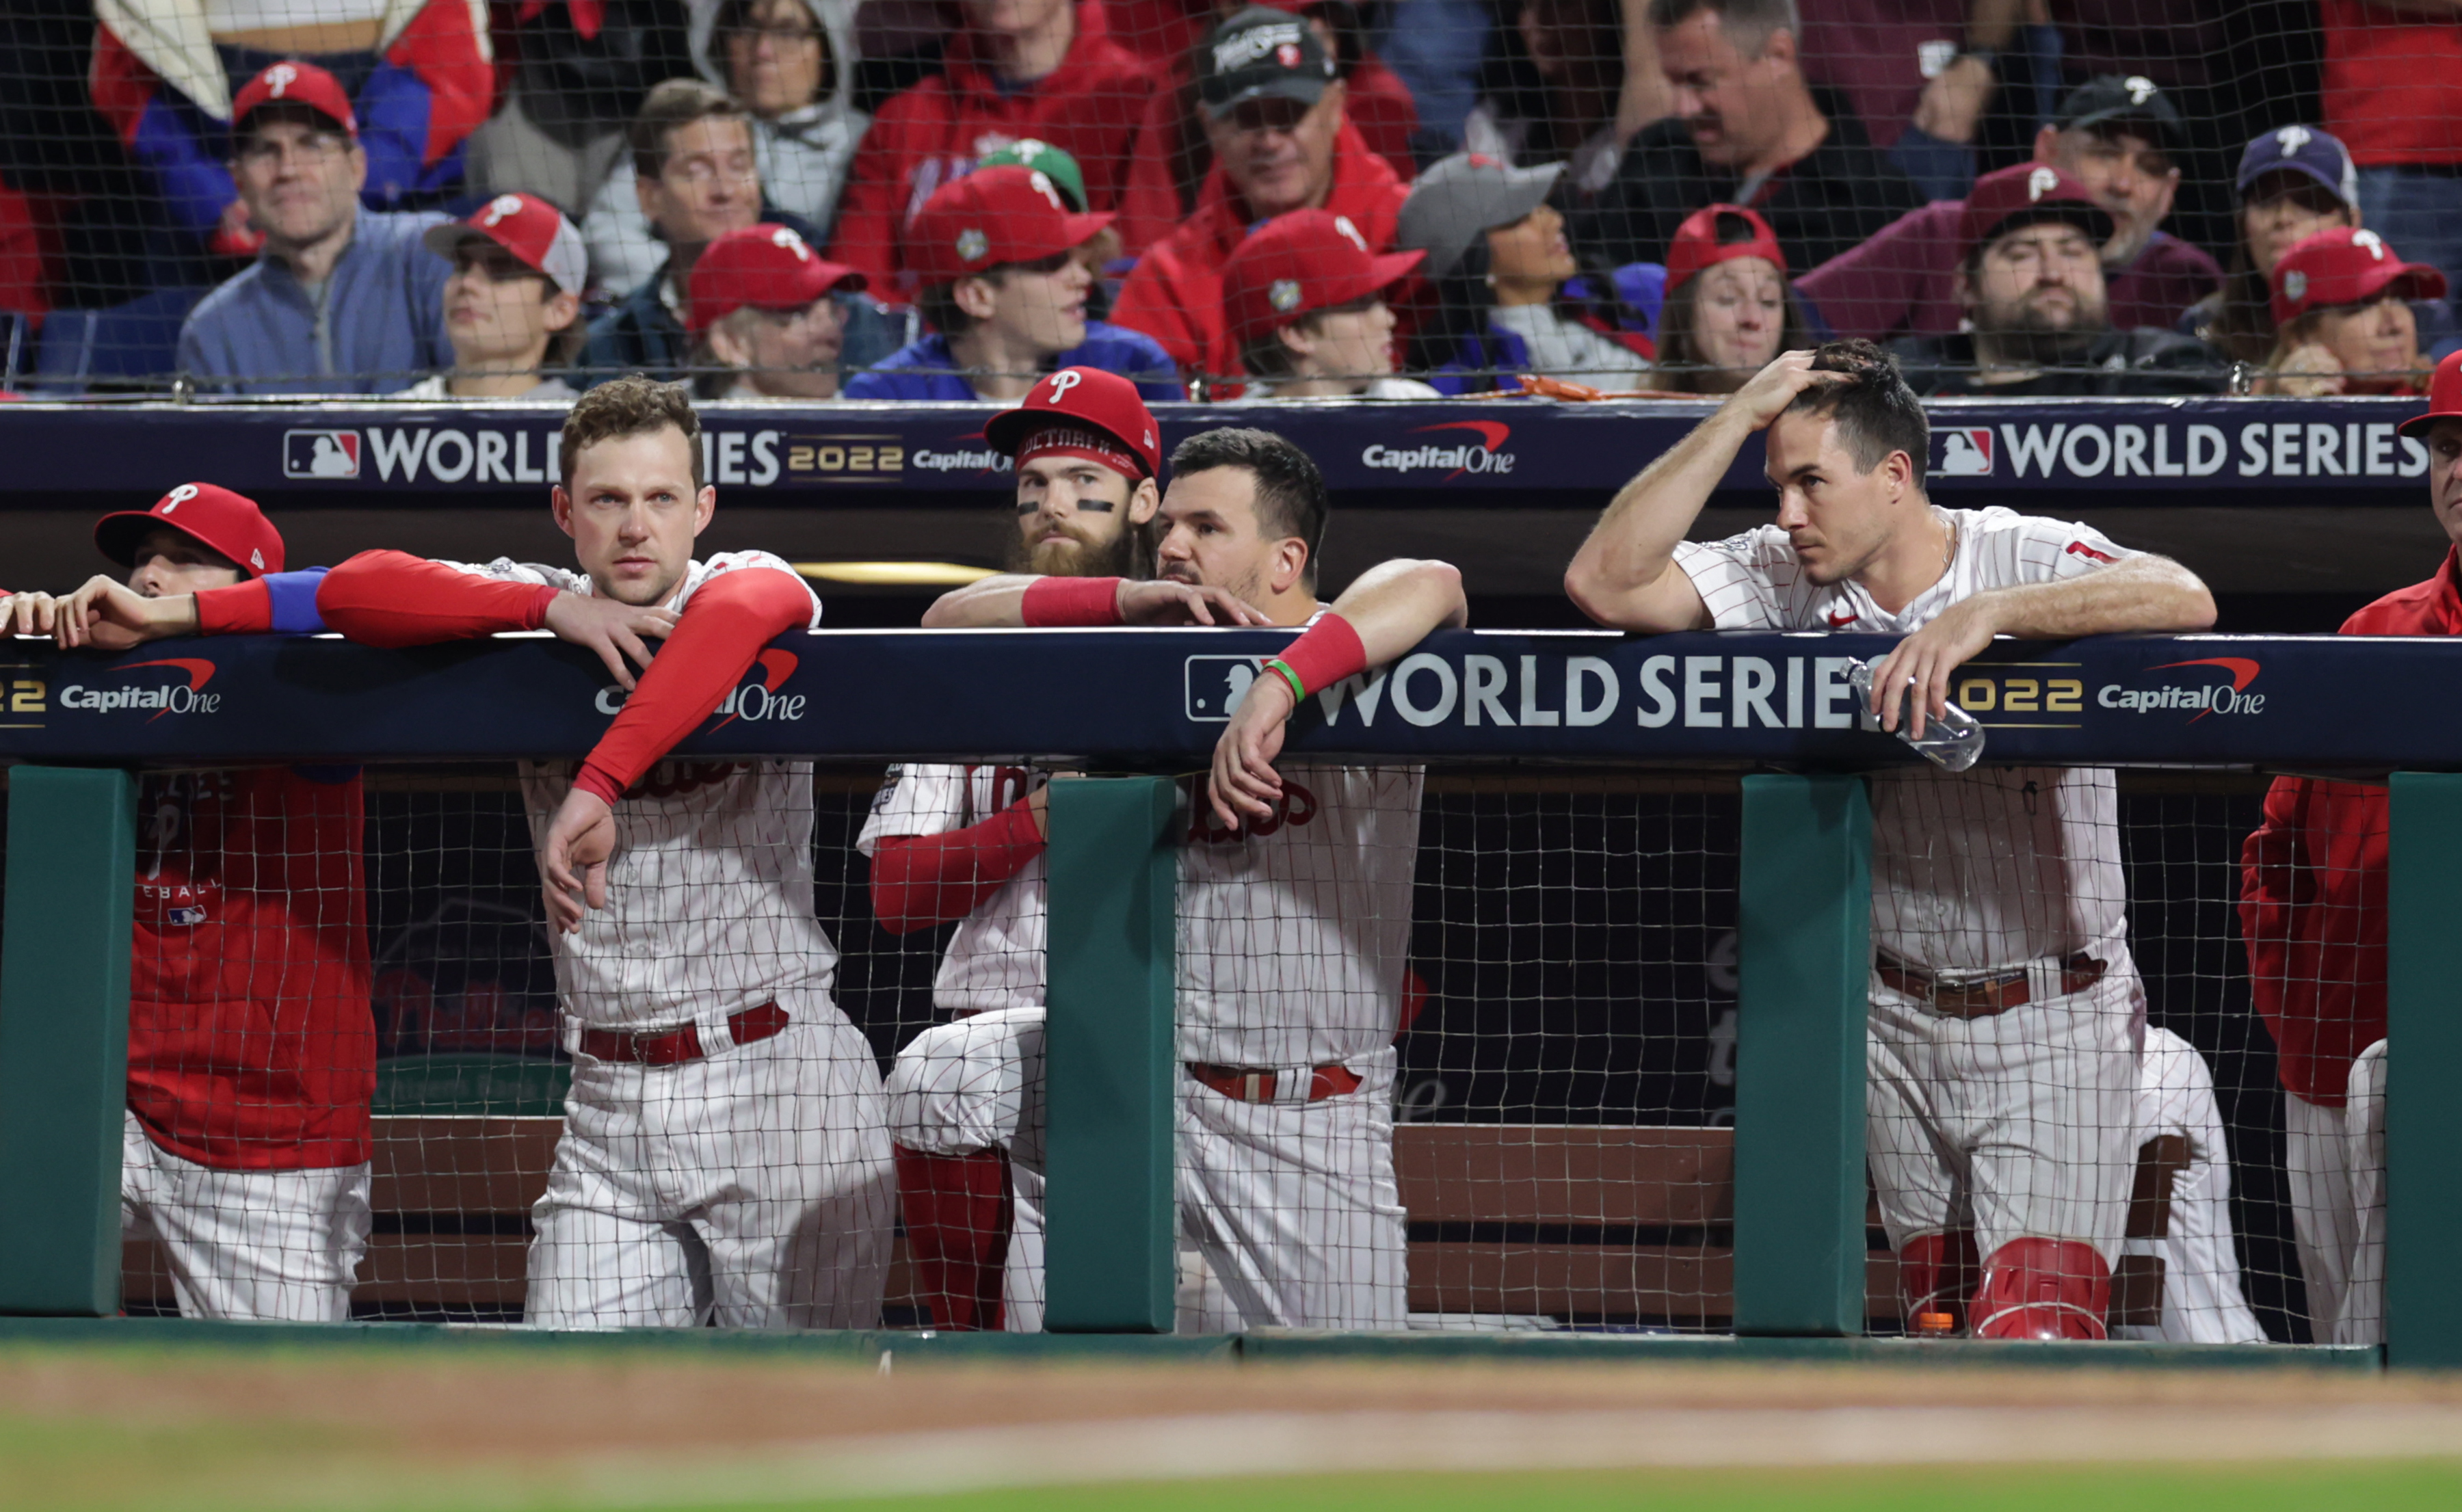 Phillies finish off Rays to win World Series – Orange County Register